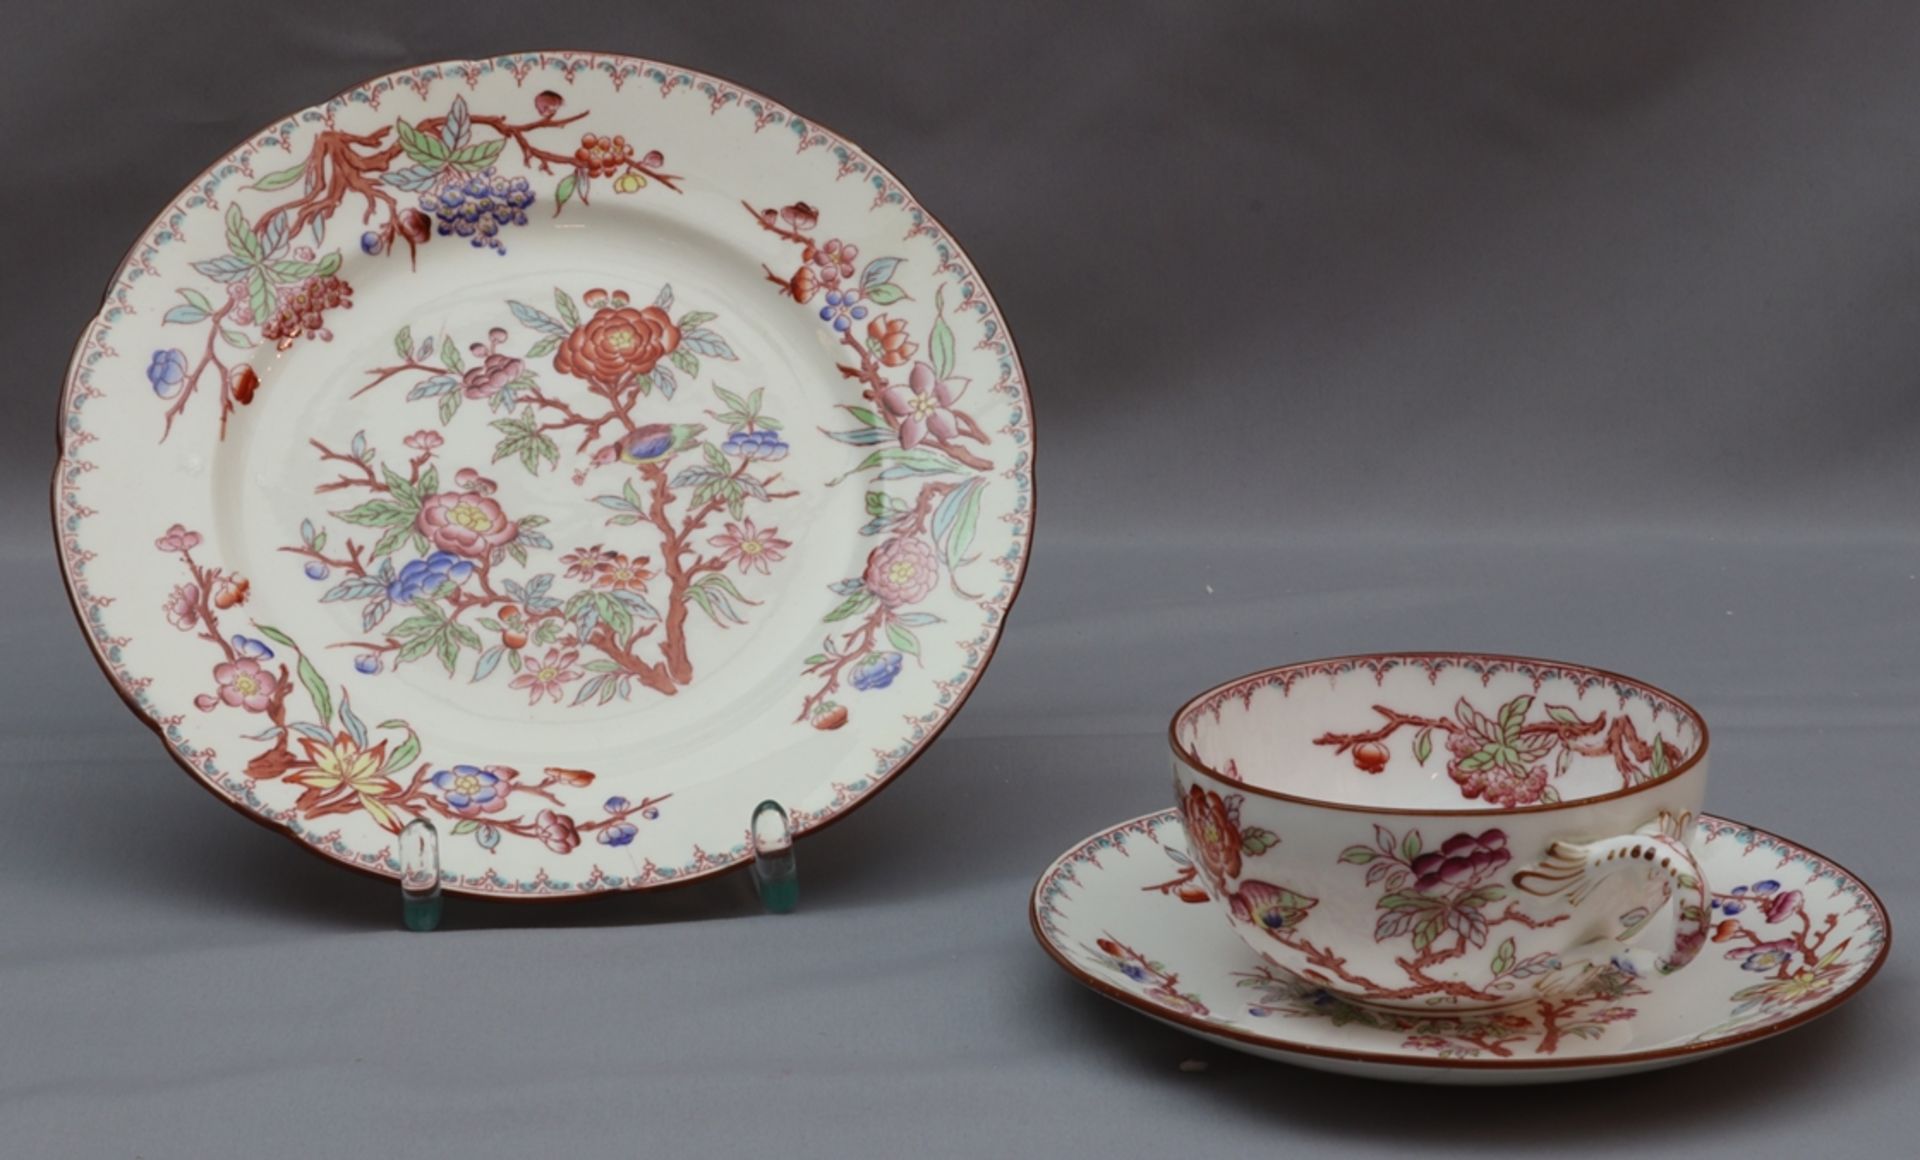 Three charming coffee sets, probably from France at the end of the 19th century.  - Image 2 of 3